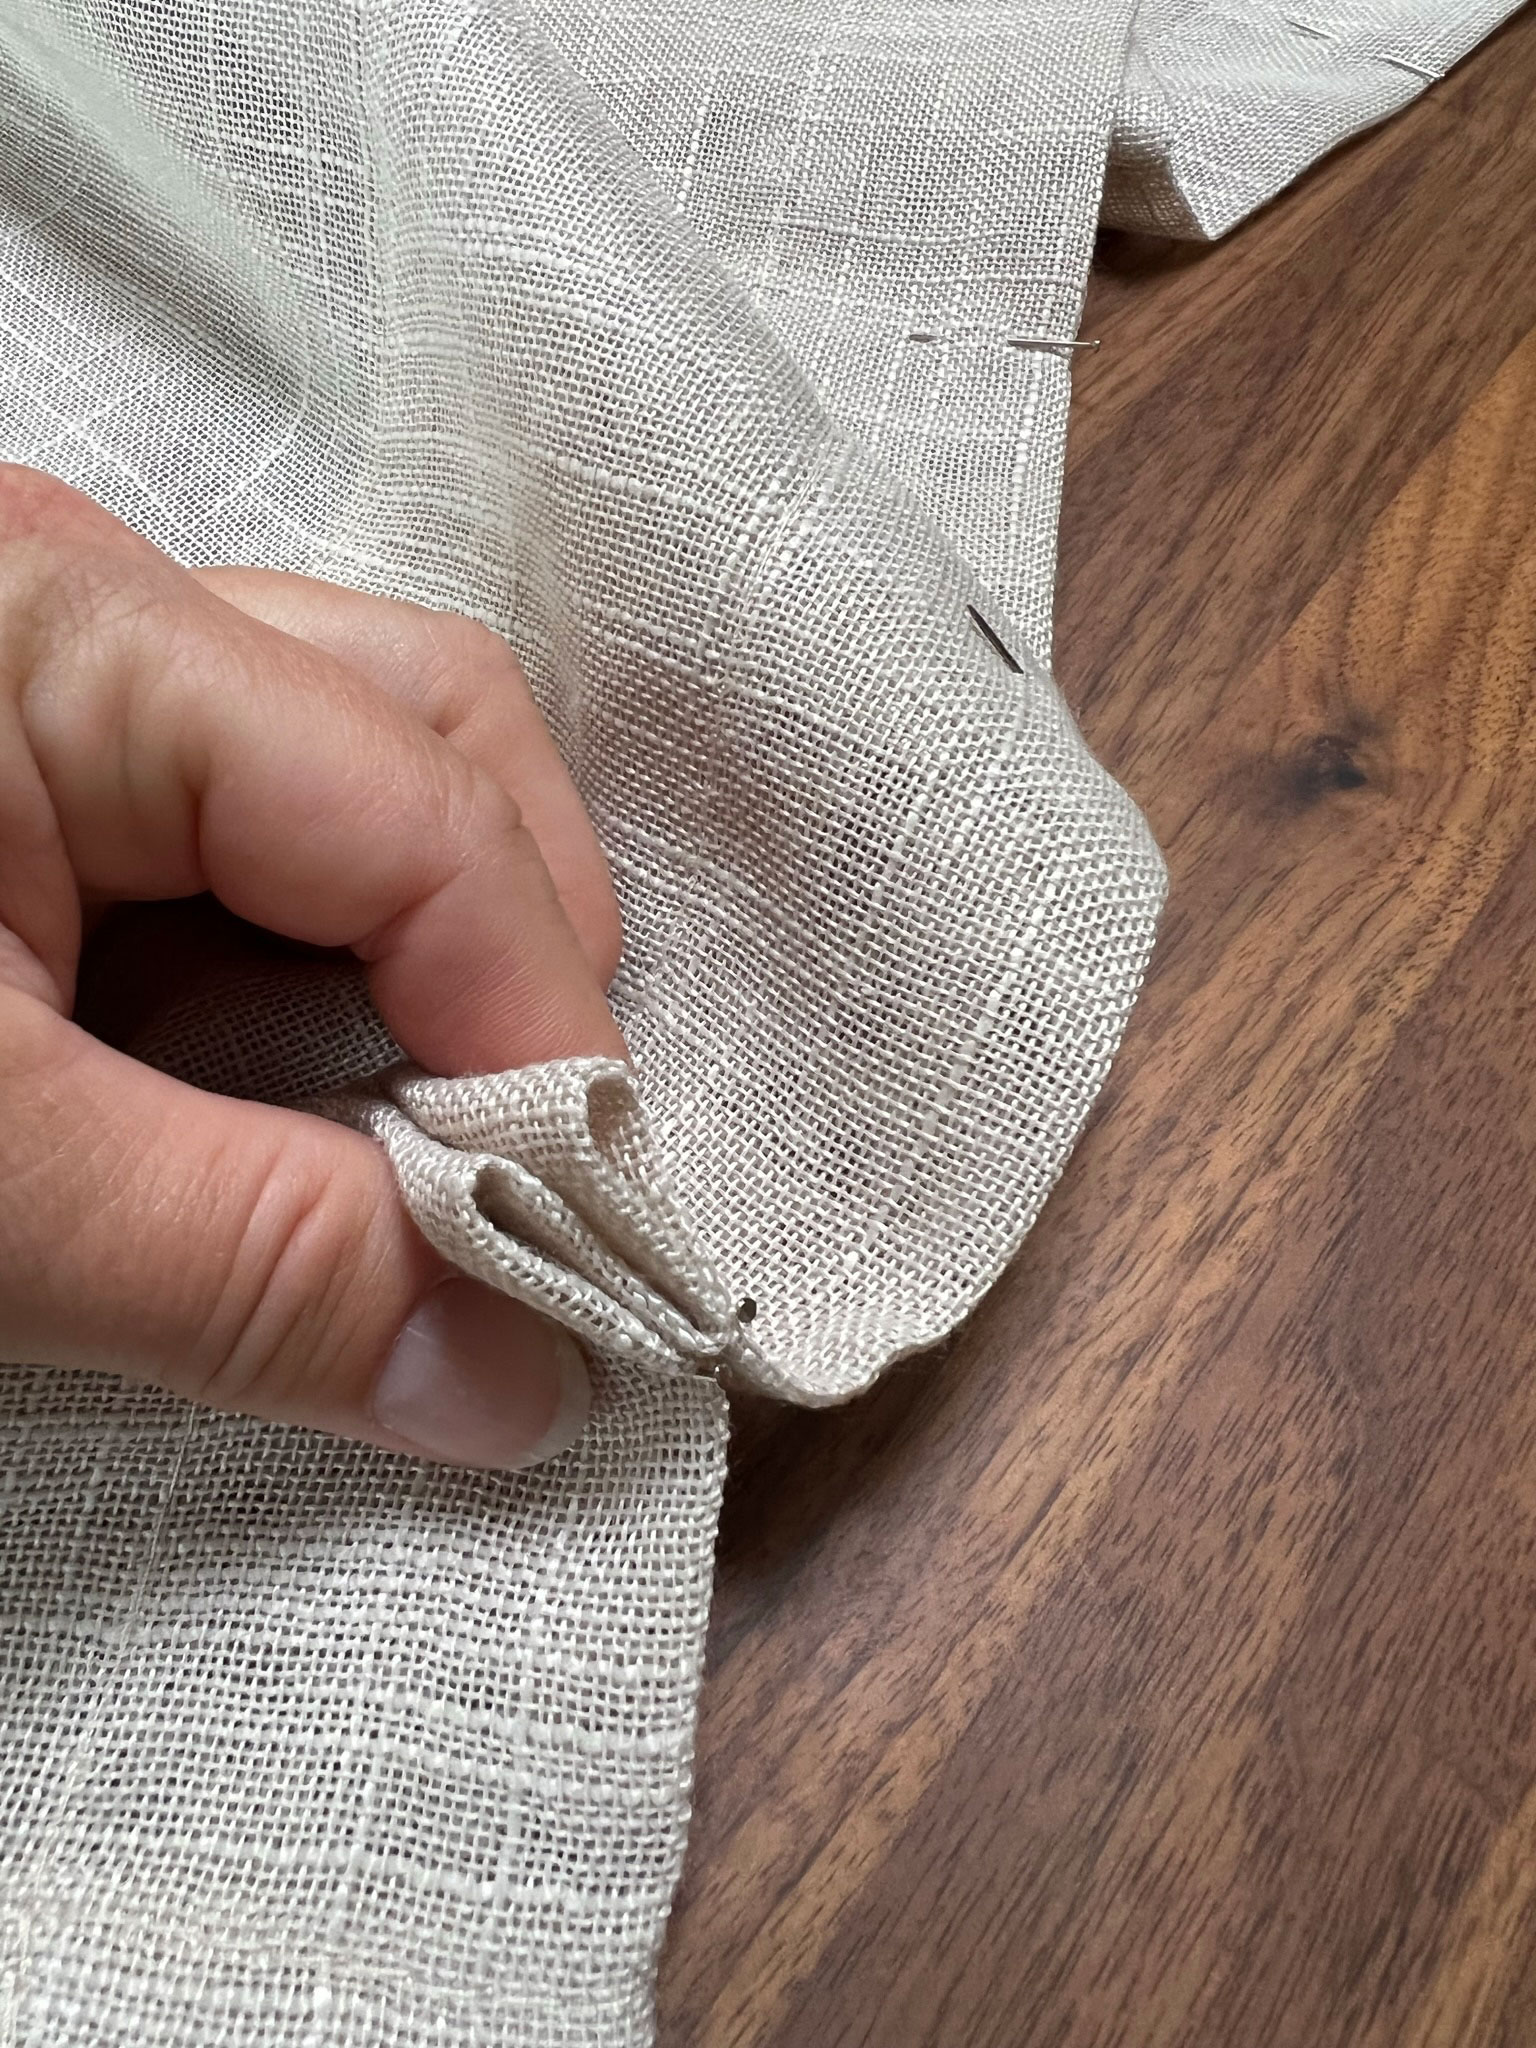 holding folded fabric in a double pleat